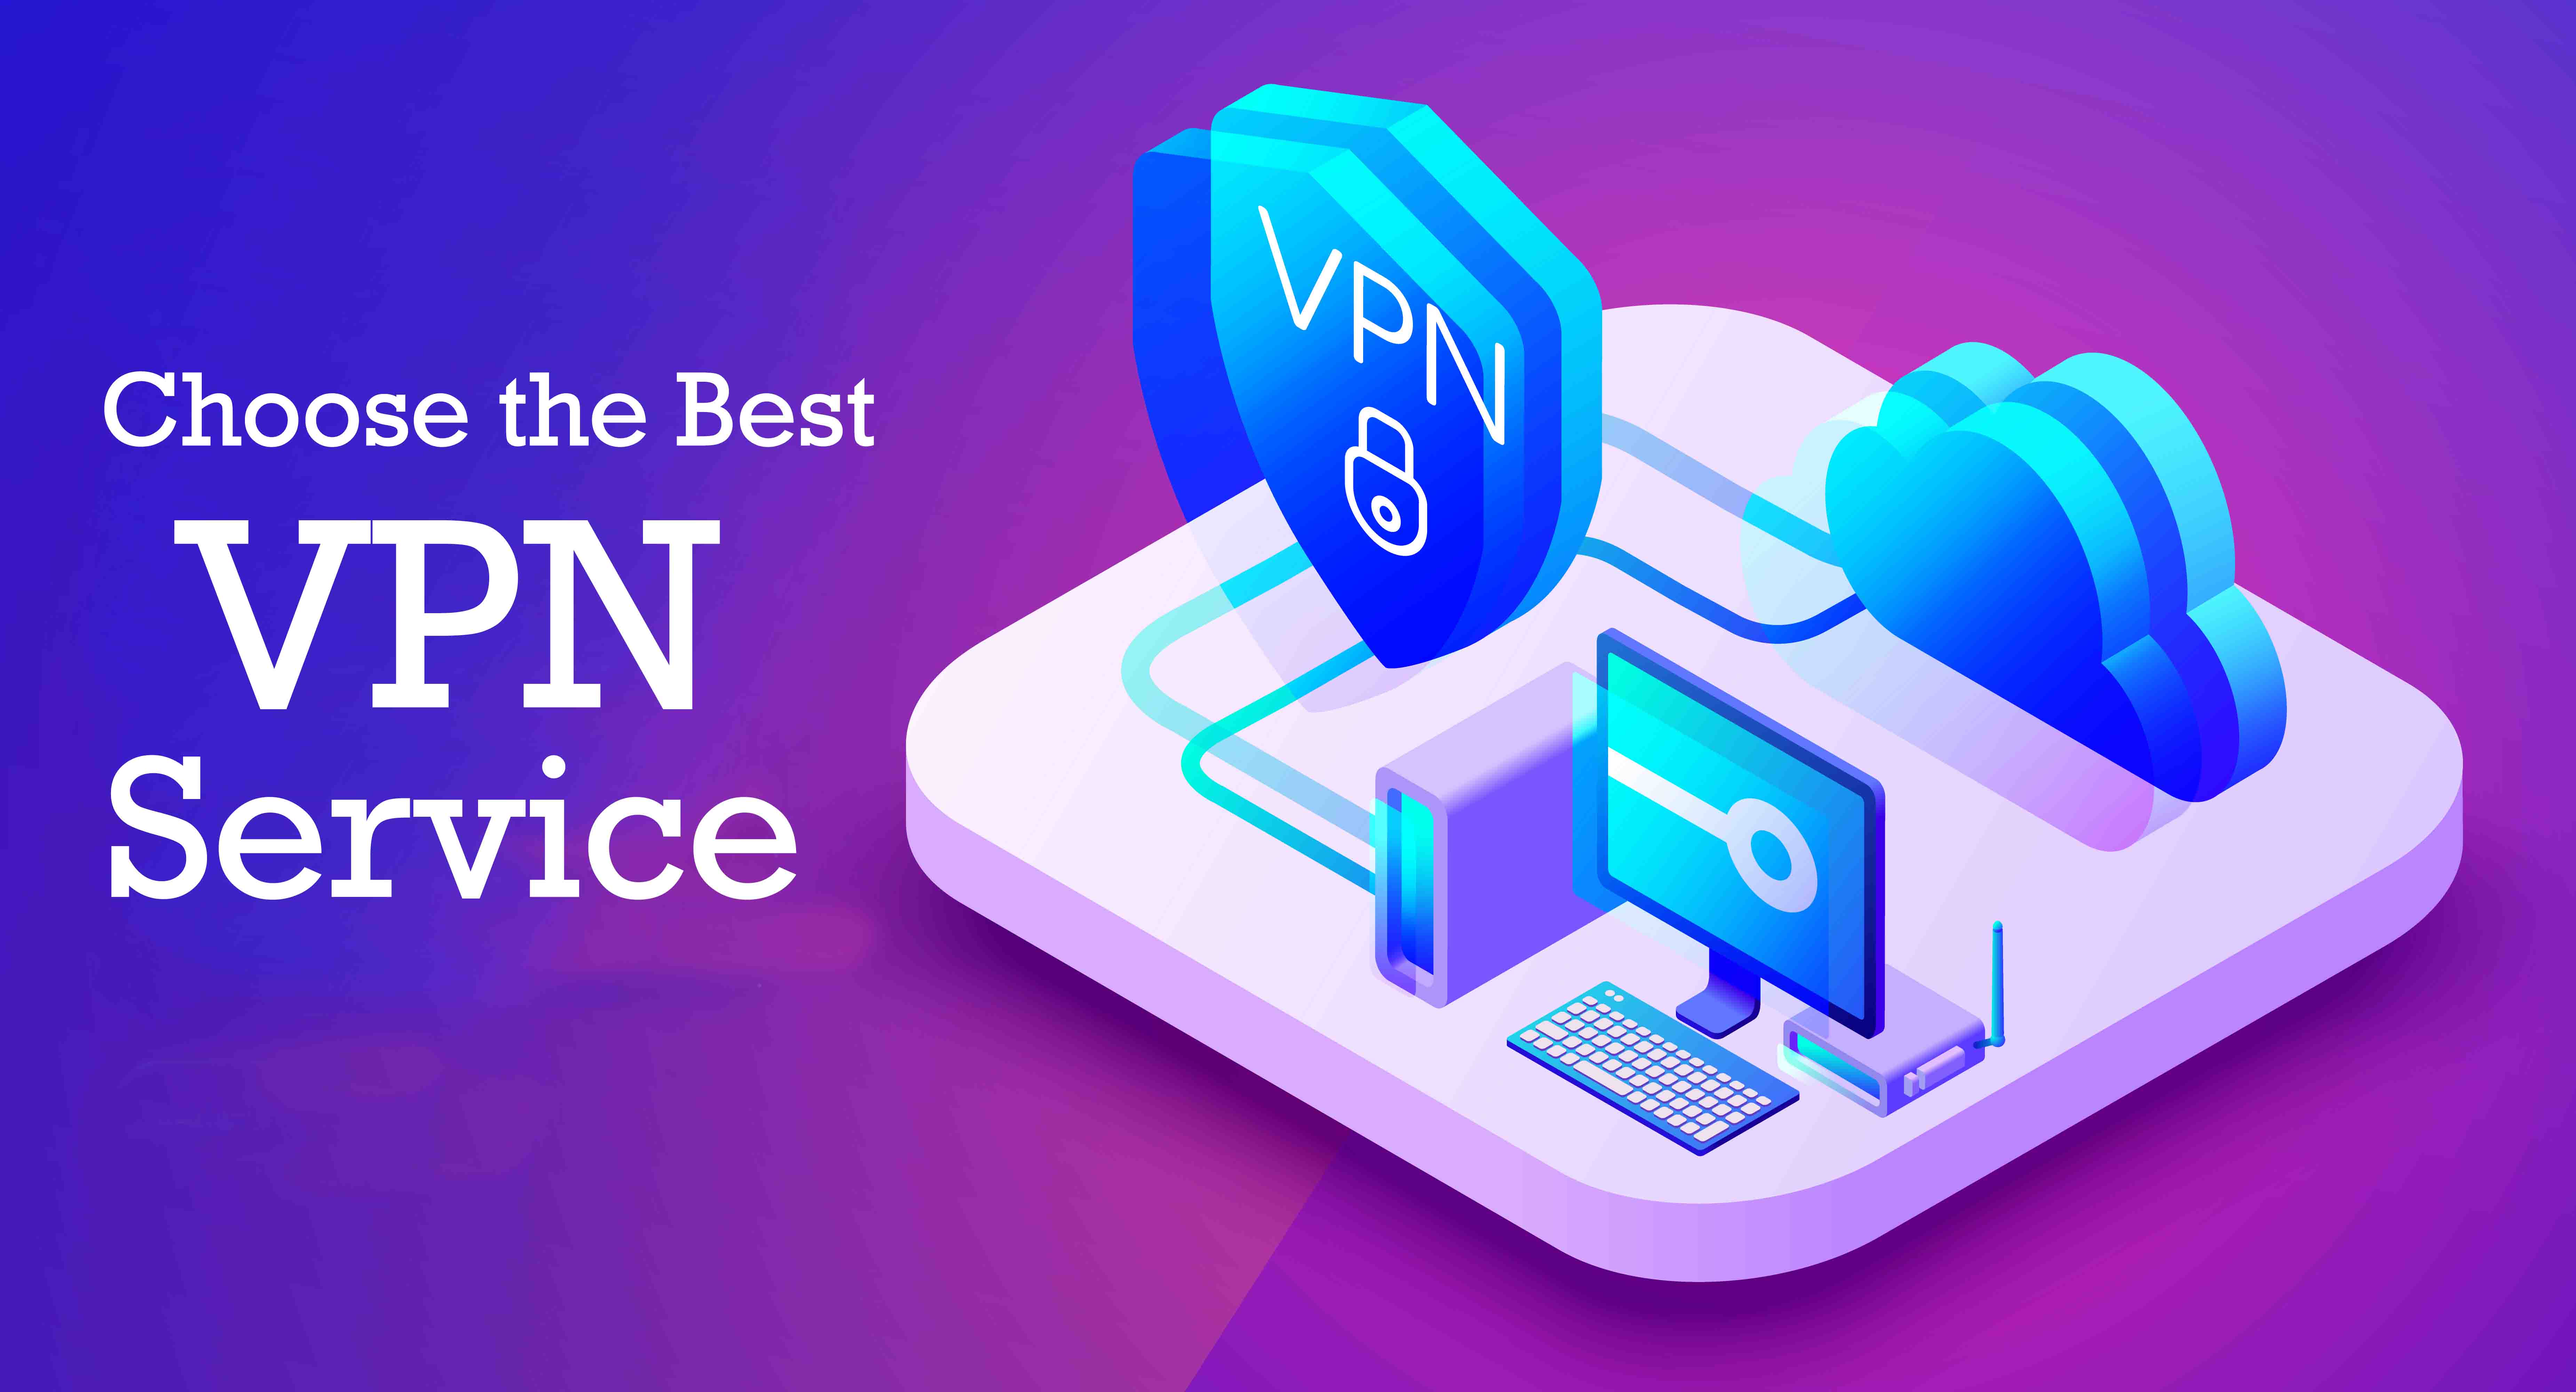 the best vpn service providers 2014